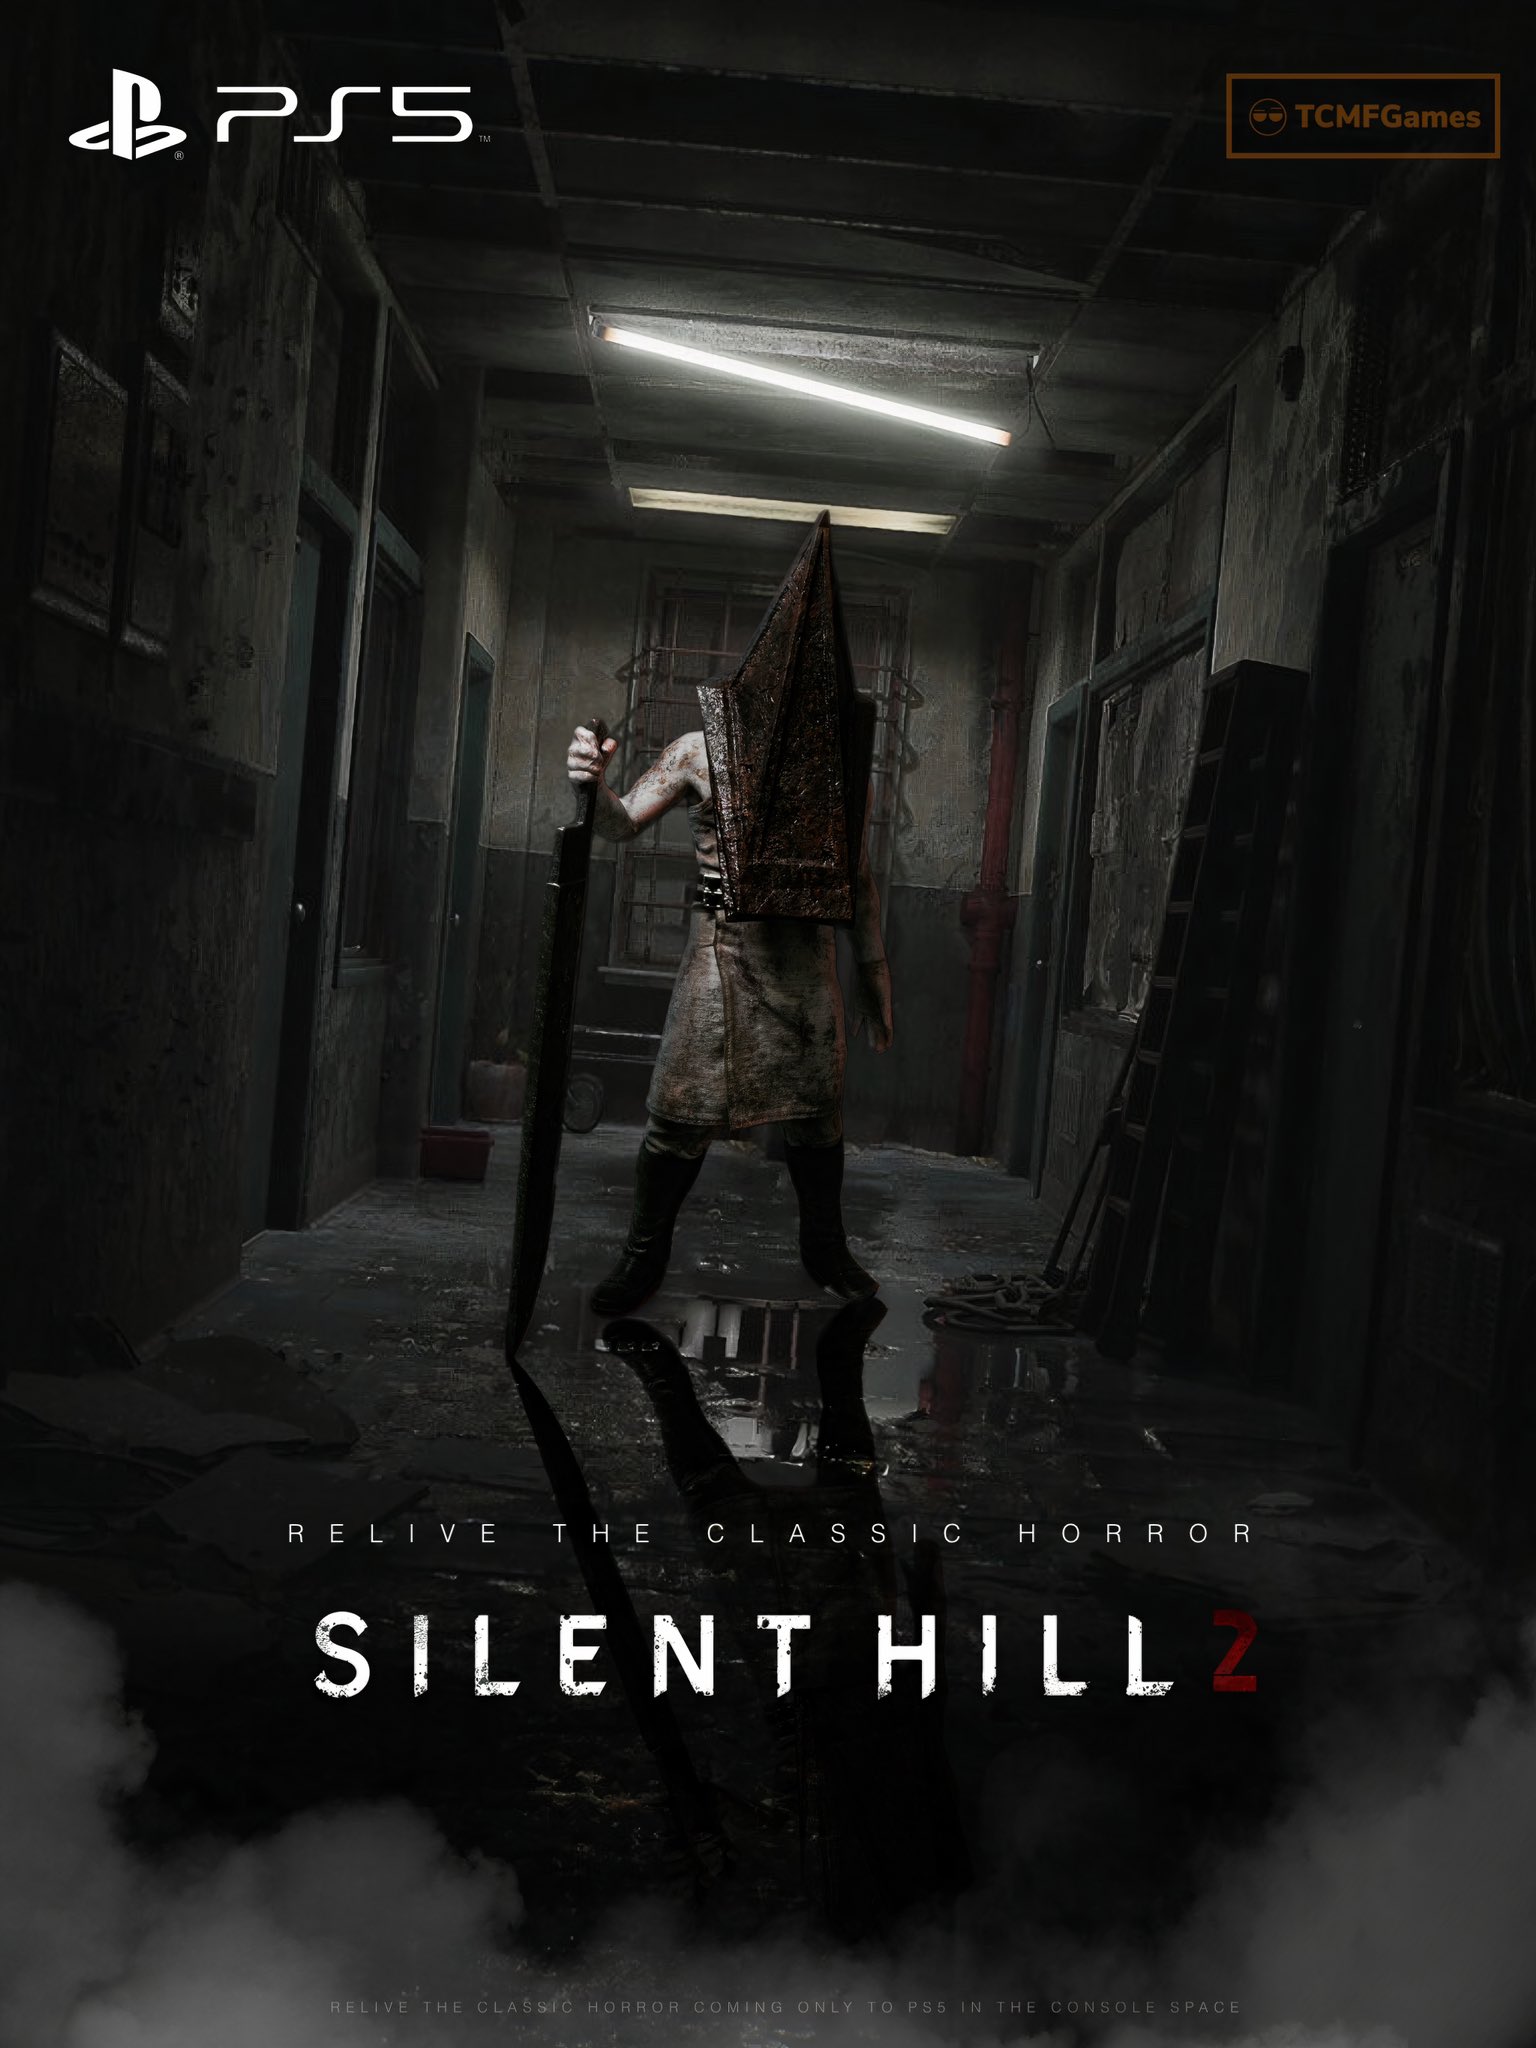 IGN on X: Silent Hill 2 Remake's PlayStation 5 console